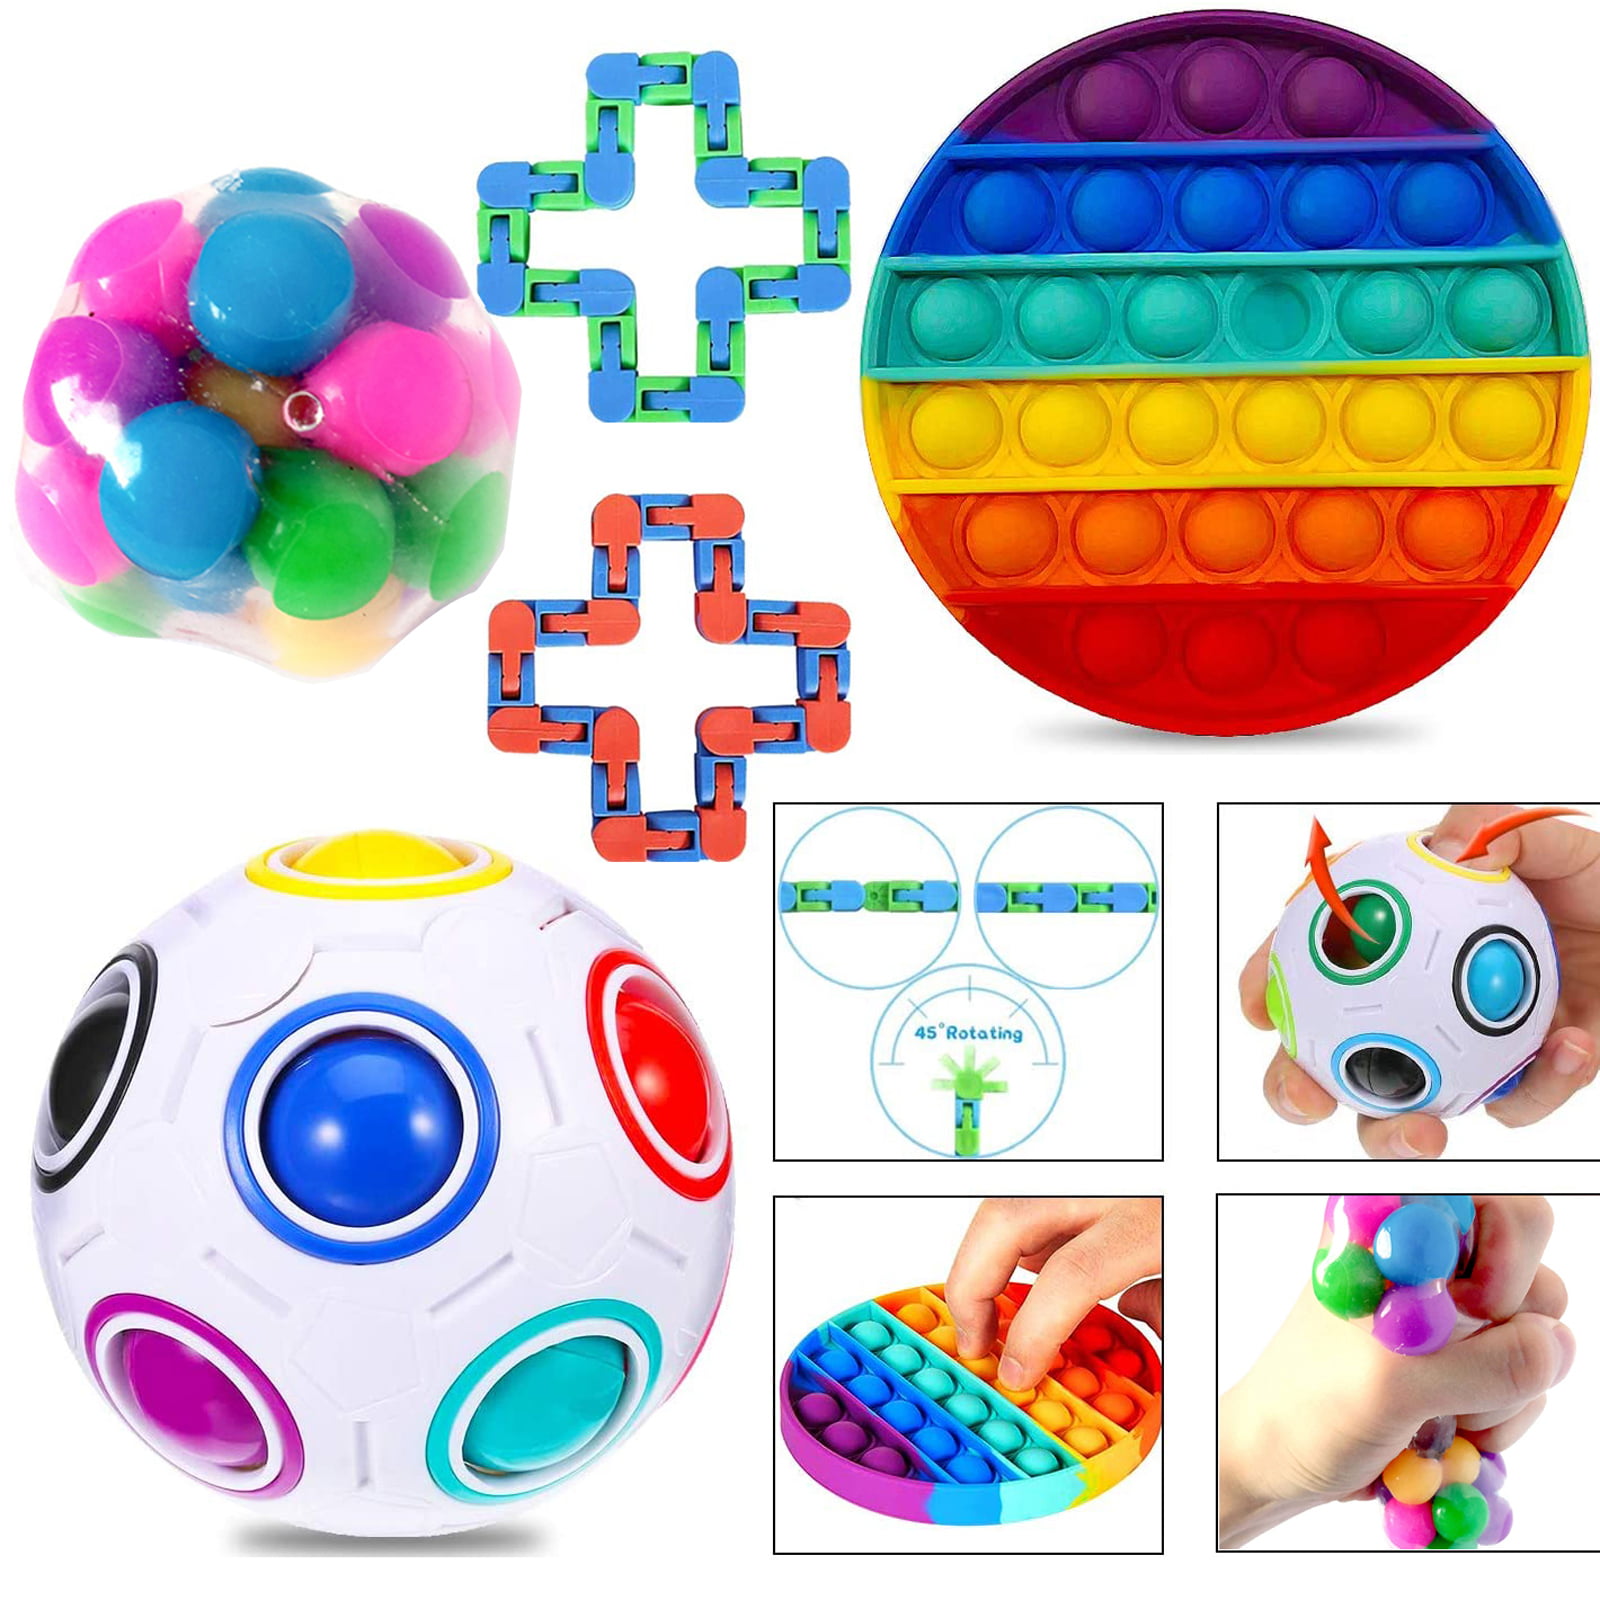 Portable Fidget Toy with Buckle Ring Stress Relief and Anti-Anxiety Puzzle Fun Squeeze Sensory Toy Simple Dimple Fidget Popper for Adults and Kids Simple Dimple Fidget Toy 